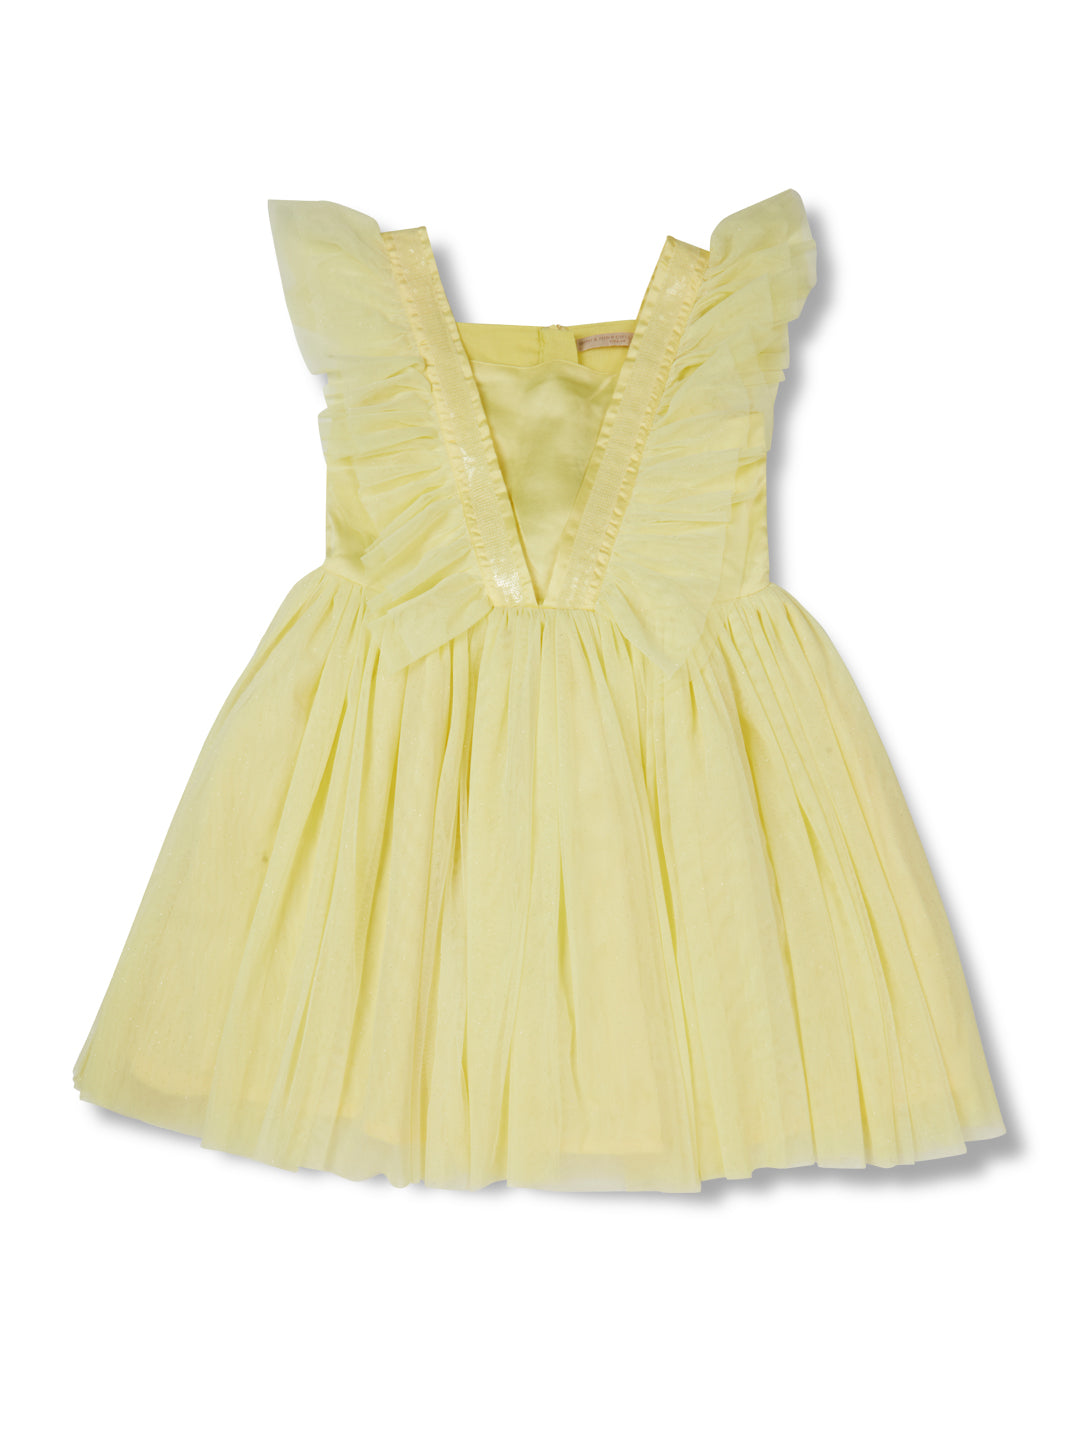 Girls yellow party wear sequinned dress with lining.